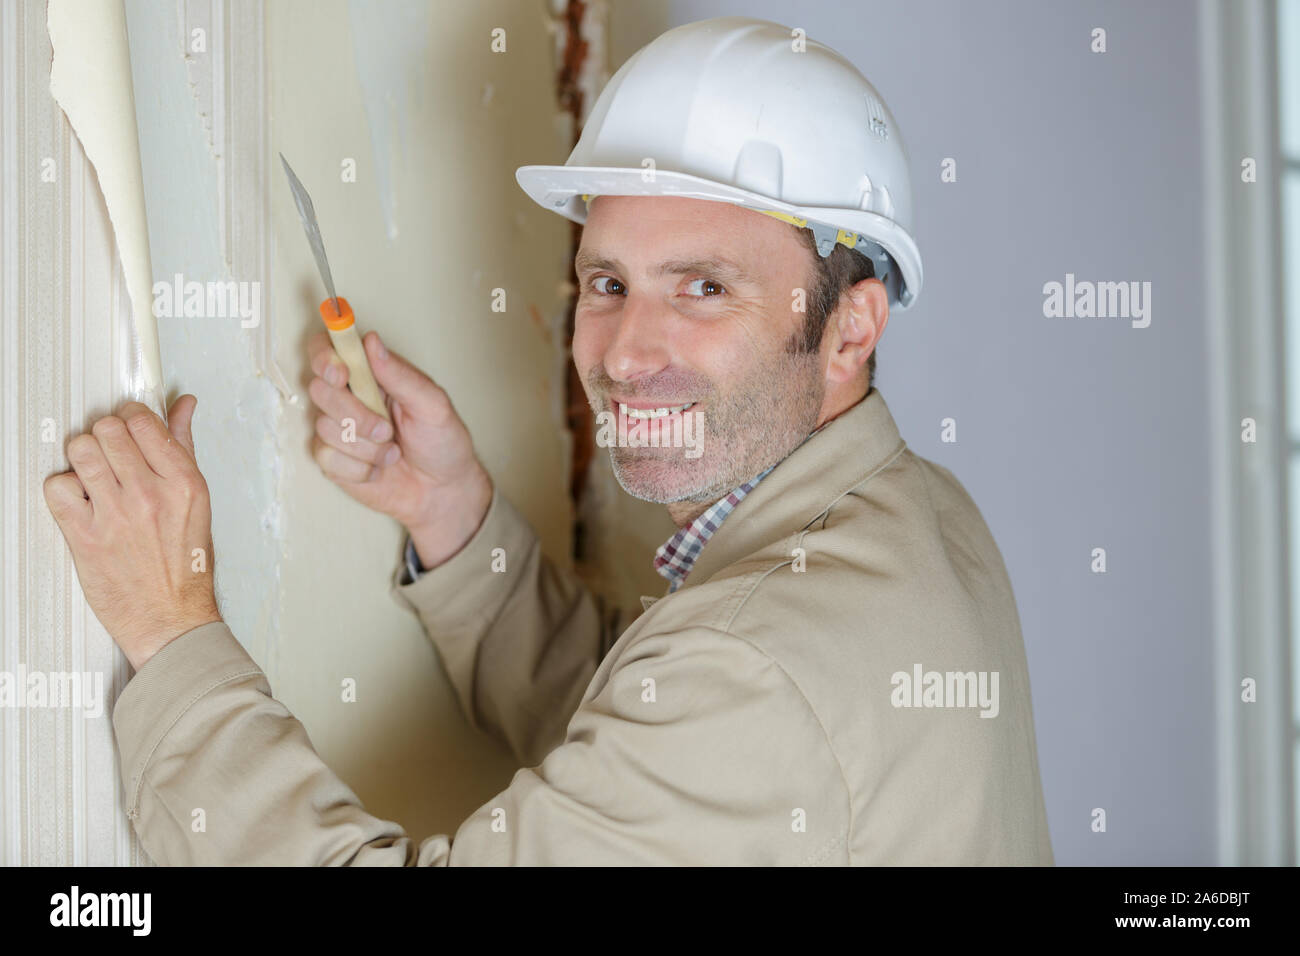 renovation of apartment wallpapering cleaning of walls Stock Photo